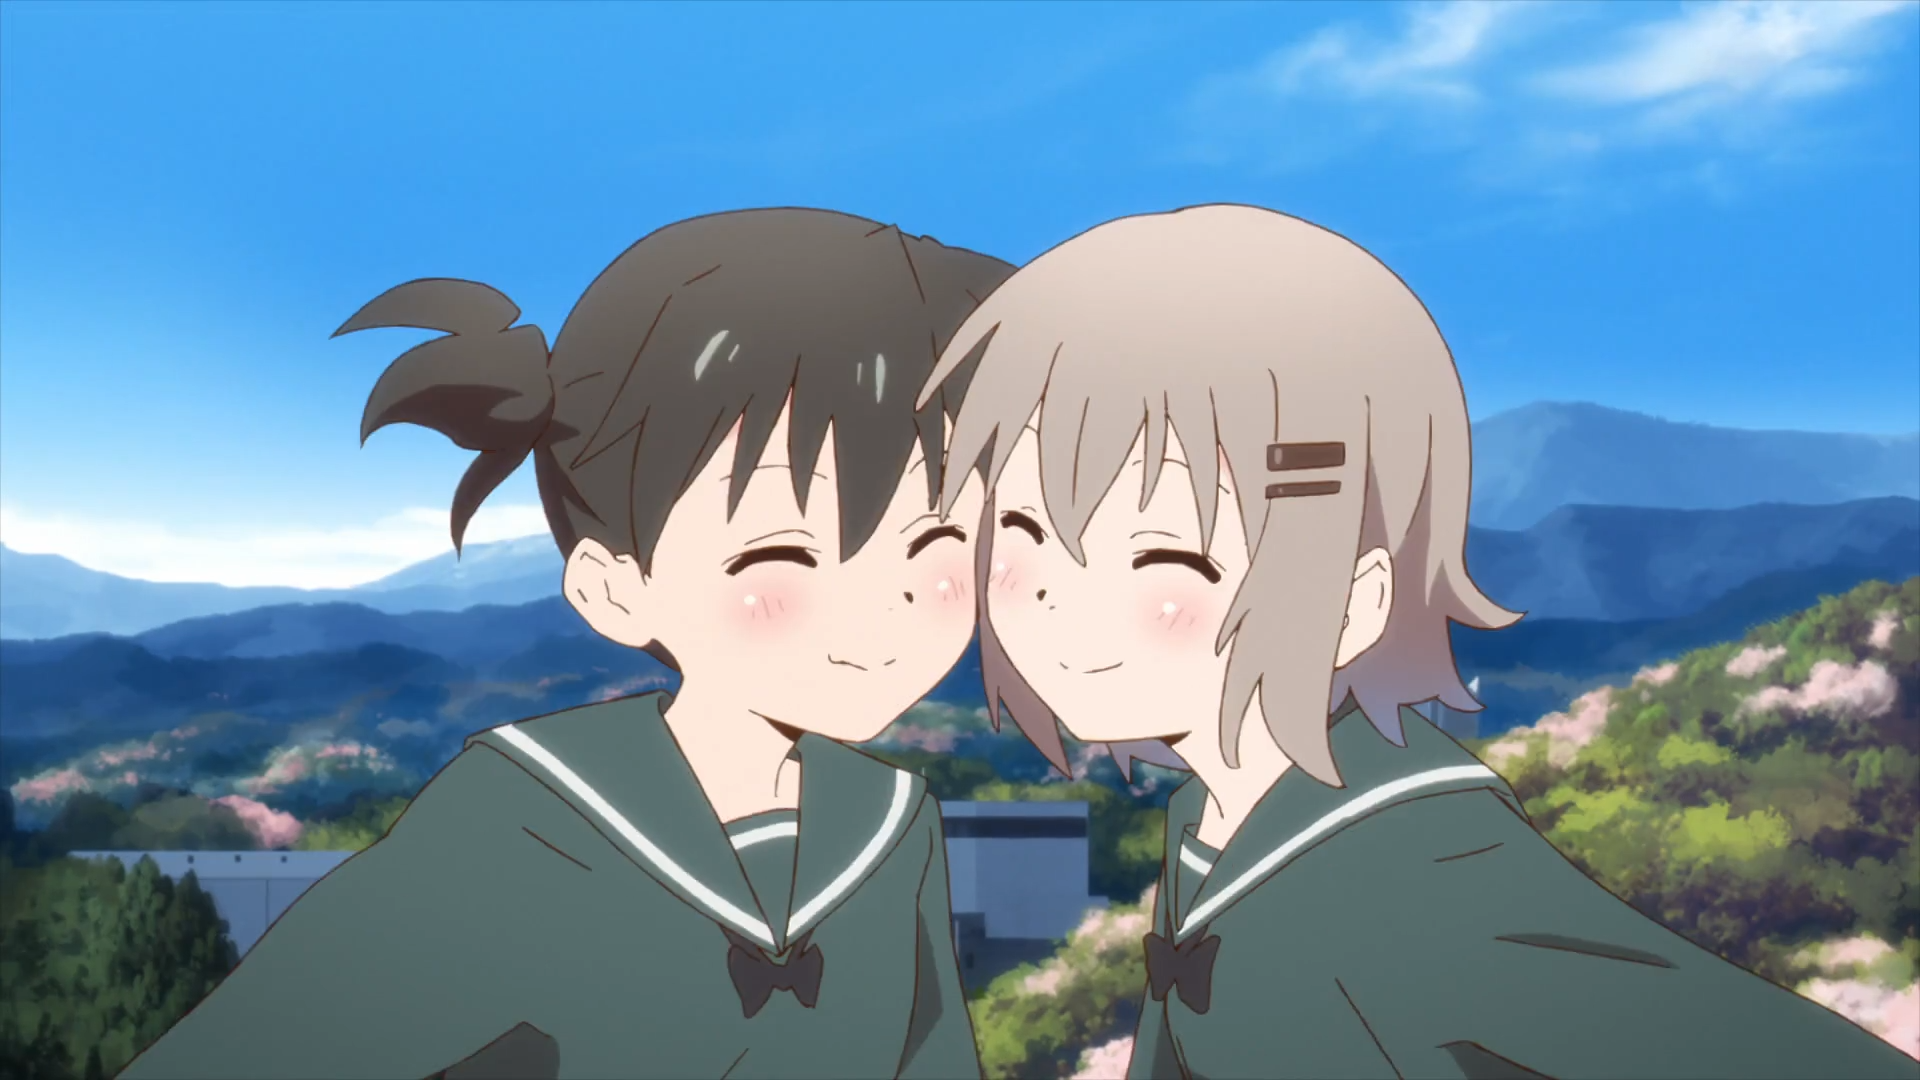 Yama no Susume: Next Summit Episode 2 Discussion - Forums